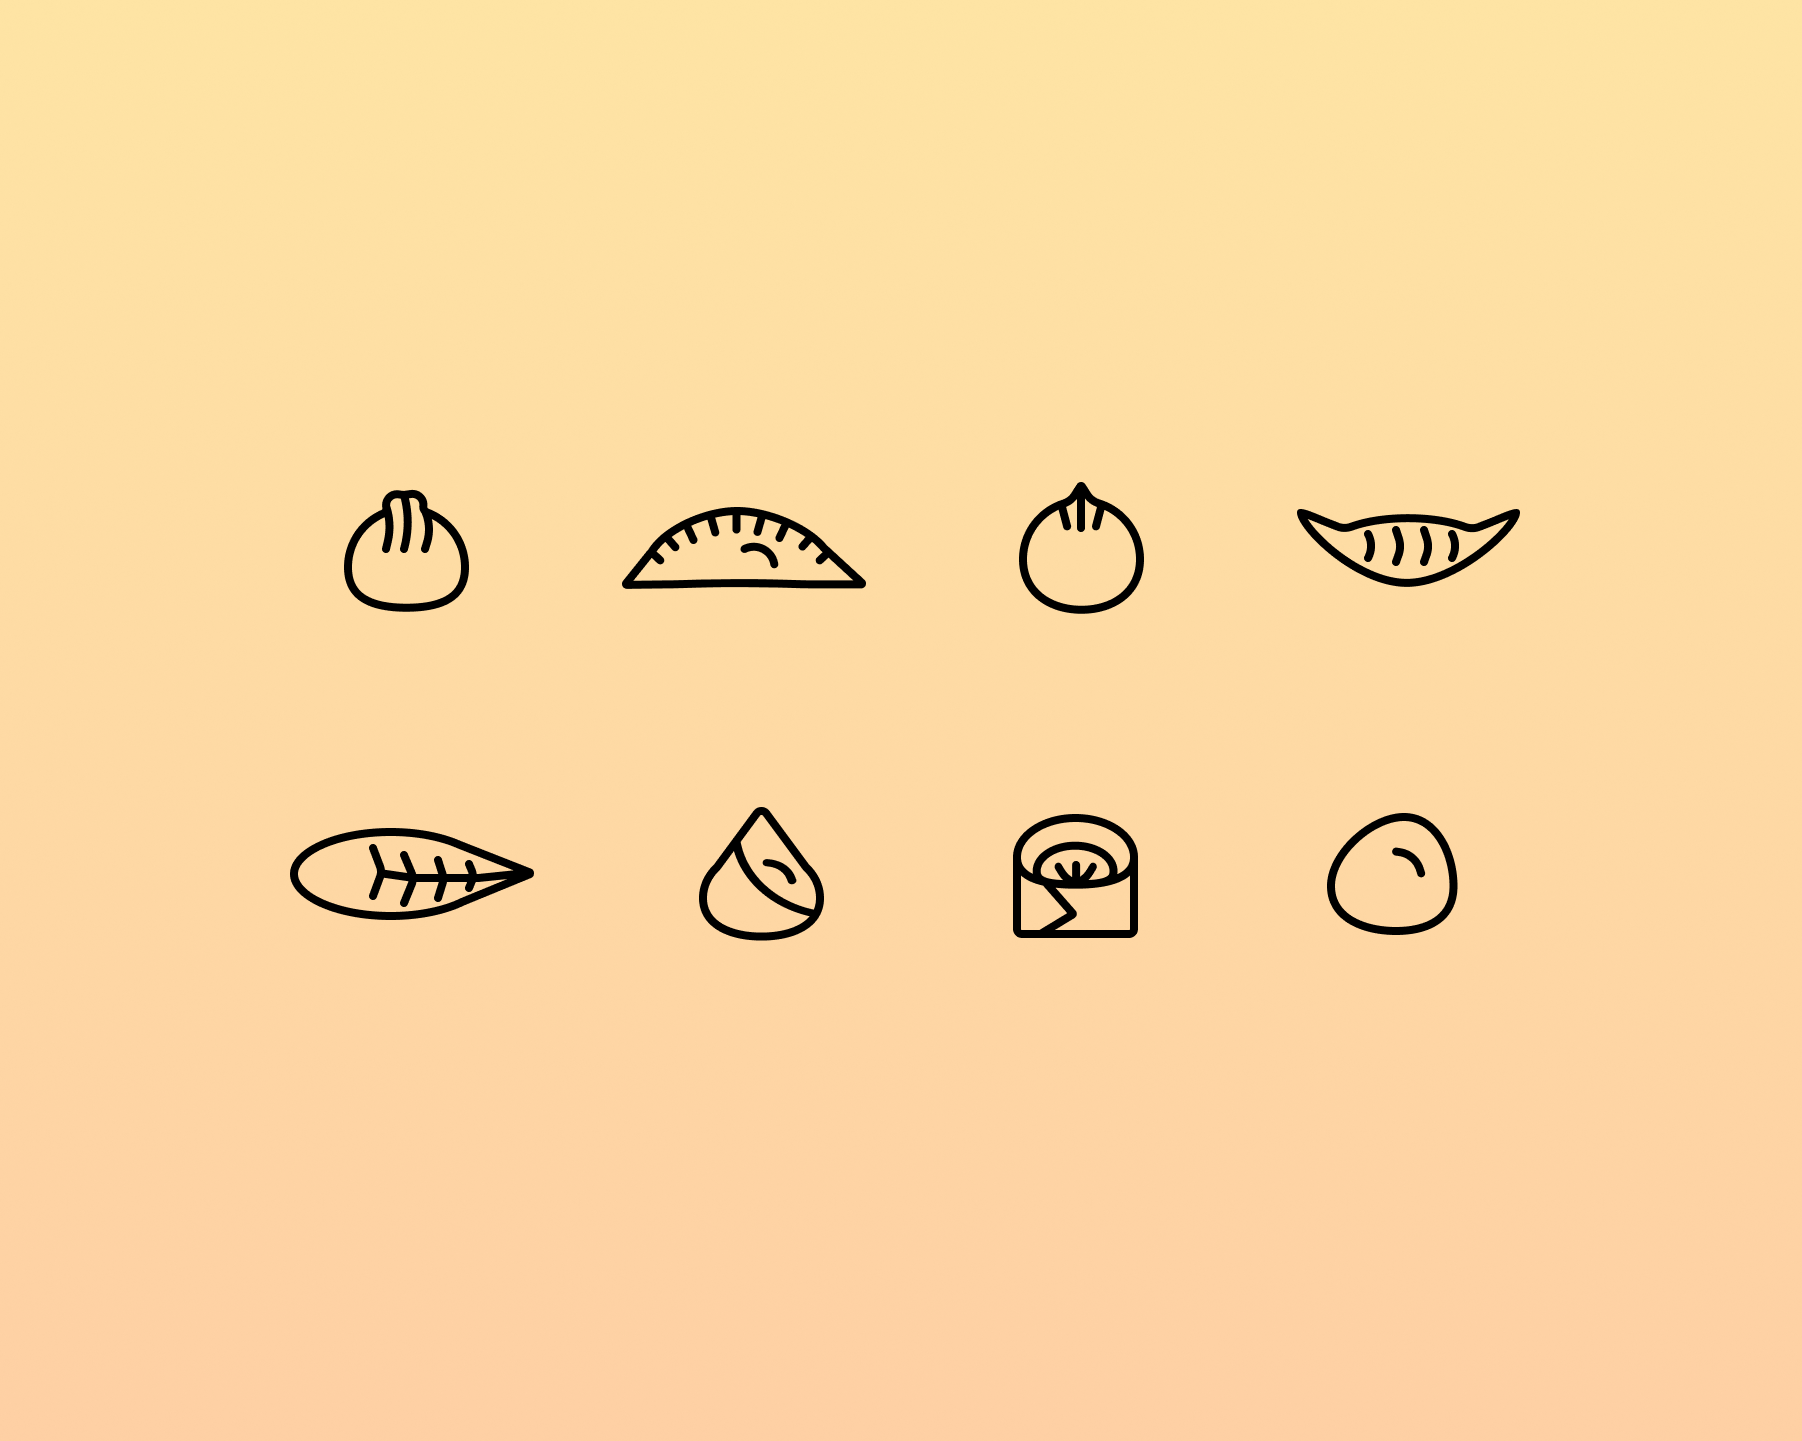 a set of icons depicting eight different dumplings